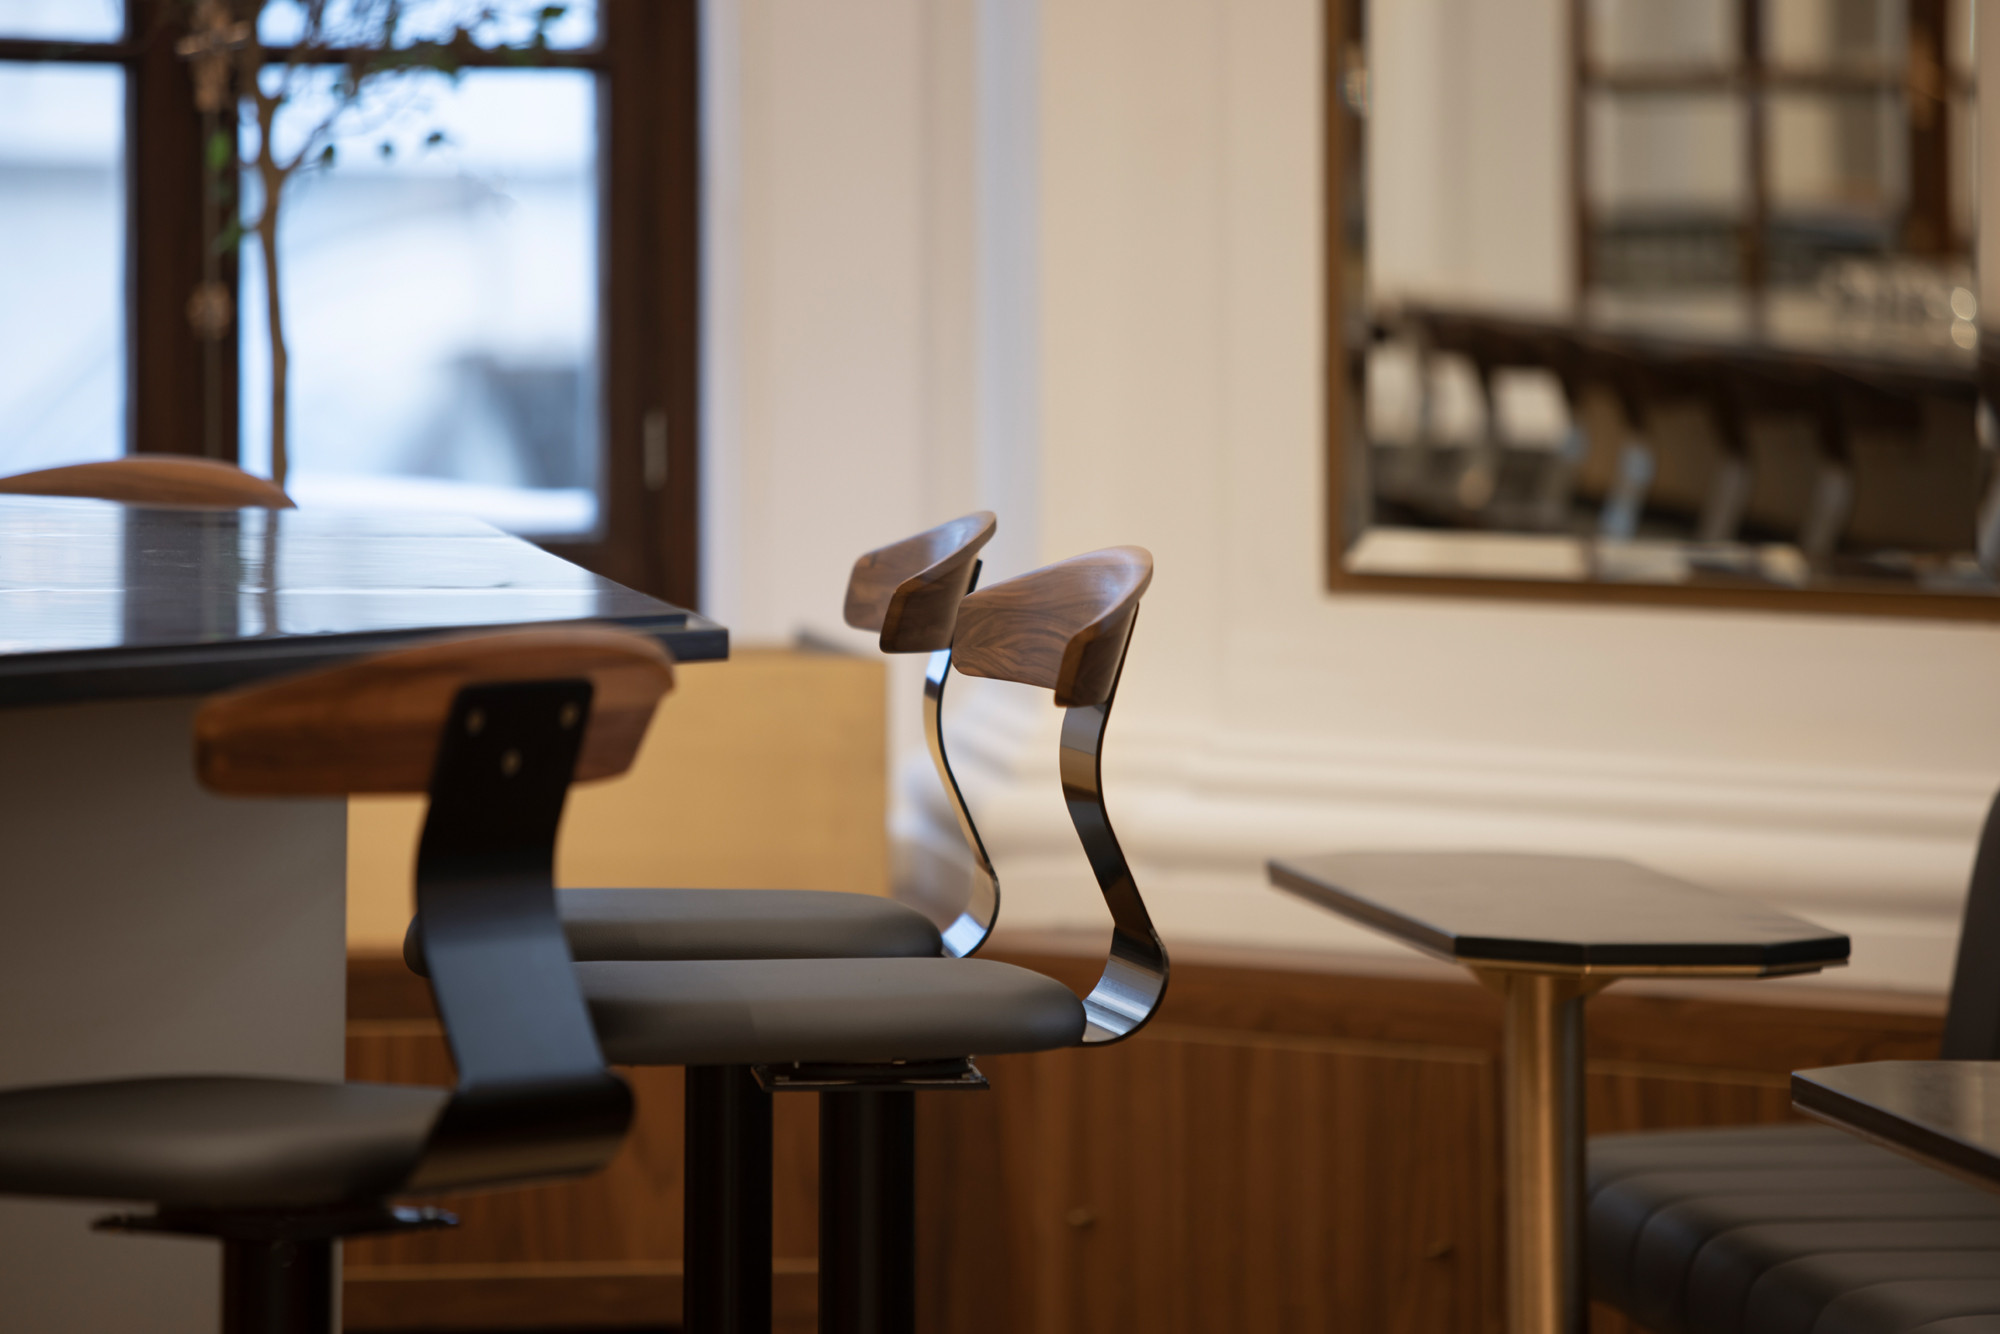 Detail view of custom bar stools in Le Parlementaire restaurant